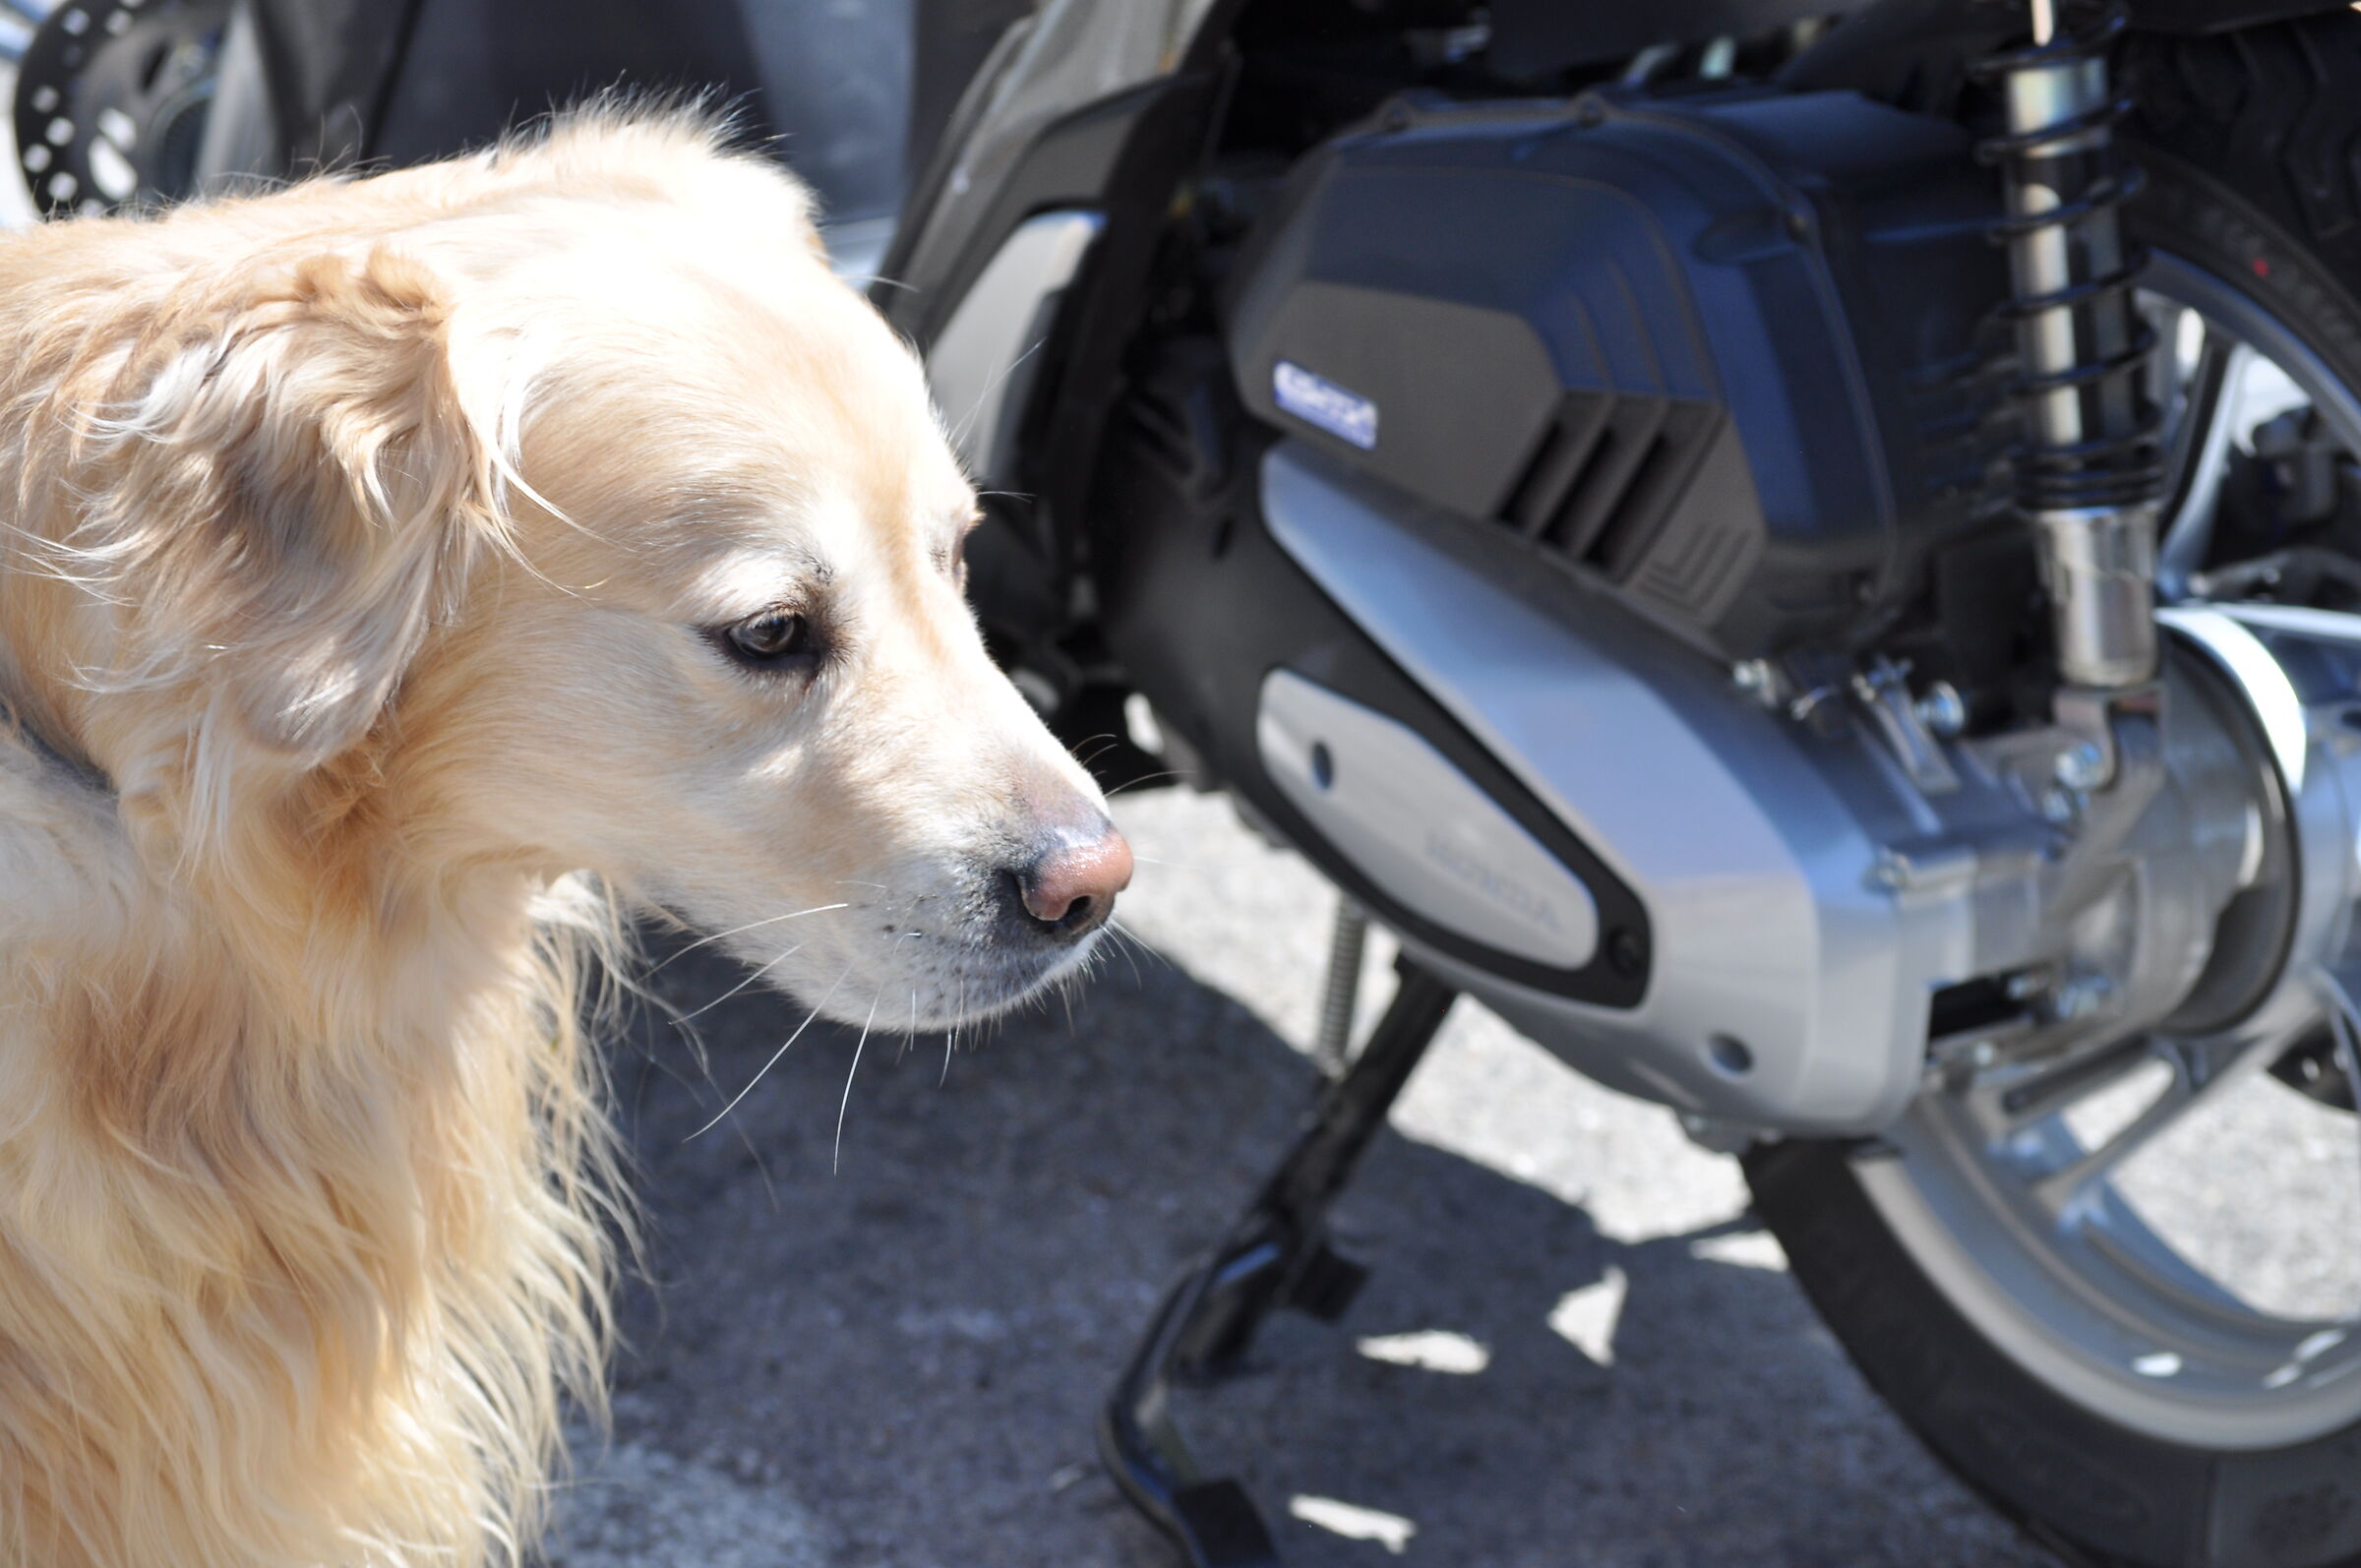 The dog and the motorcycle...